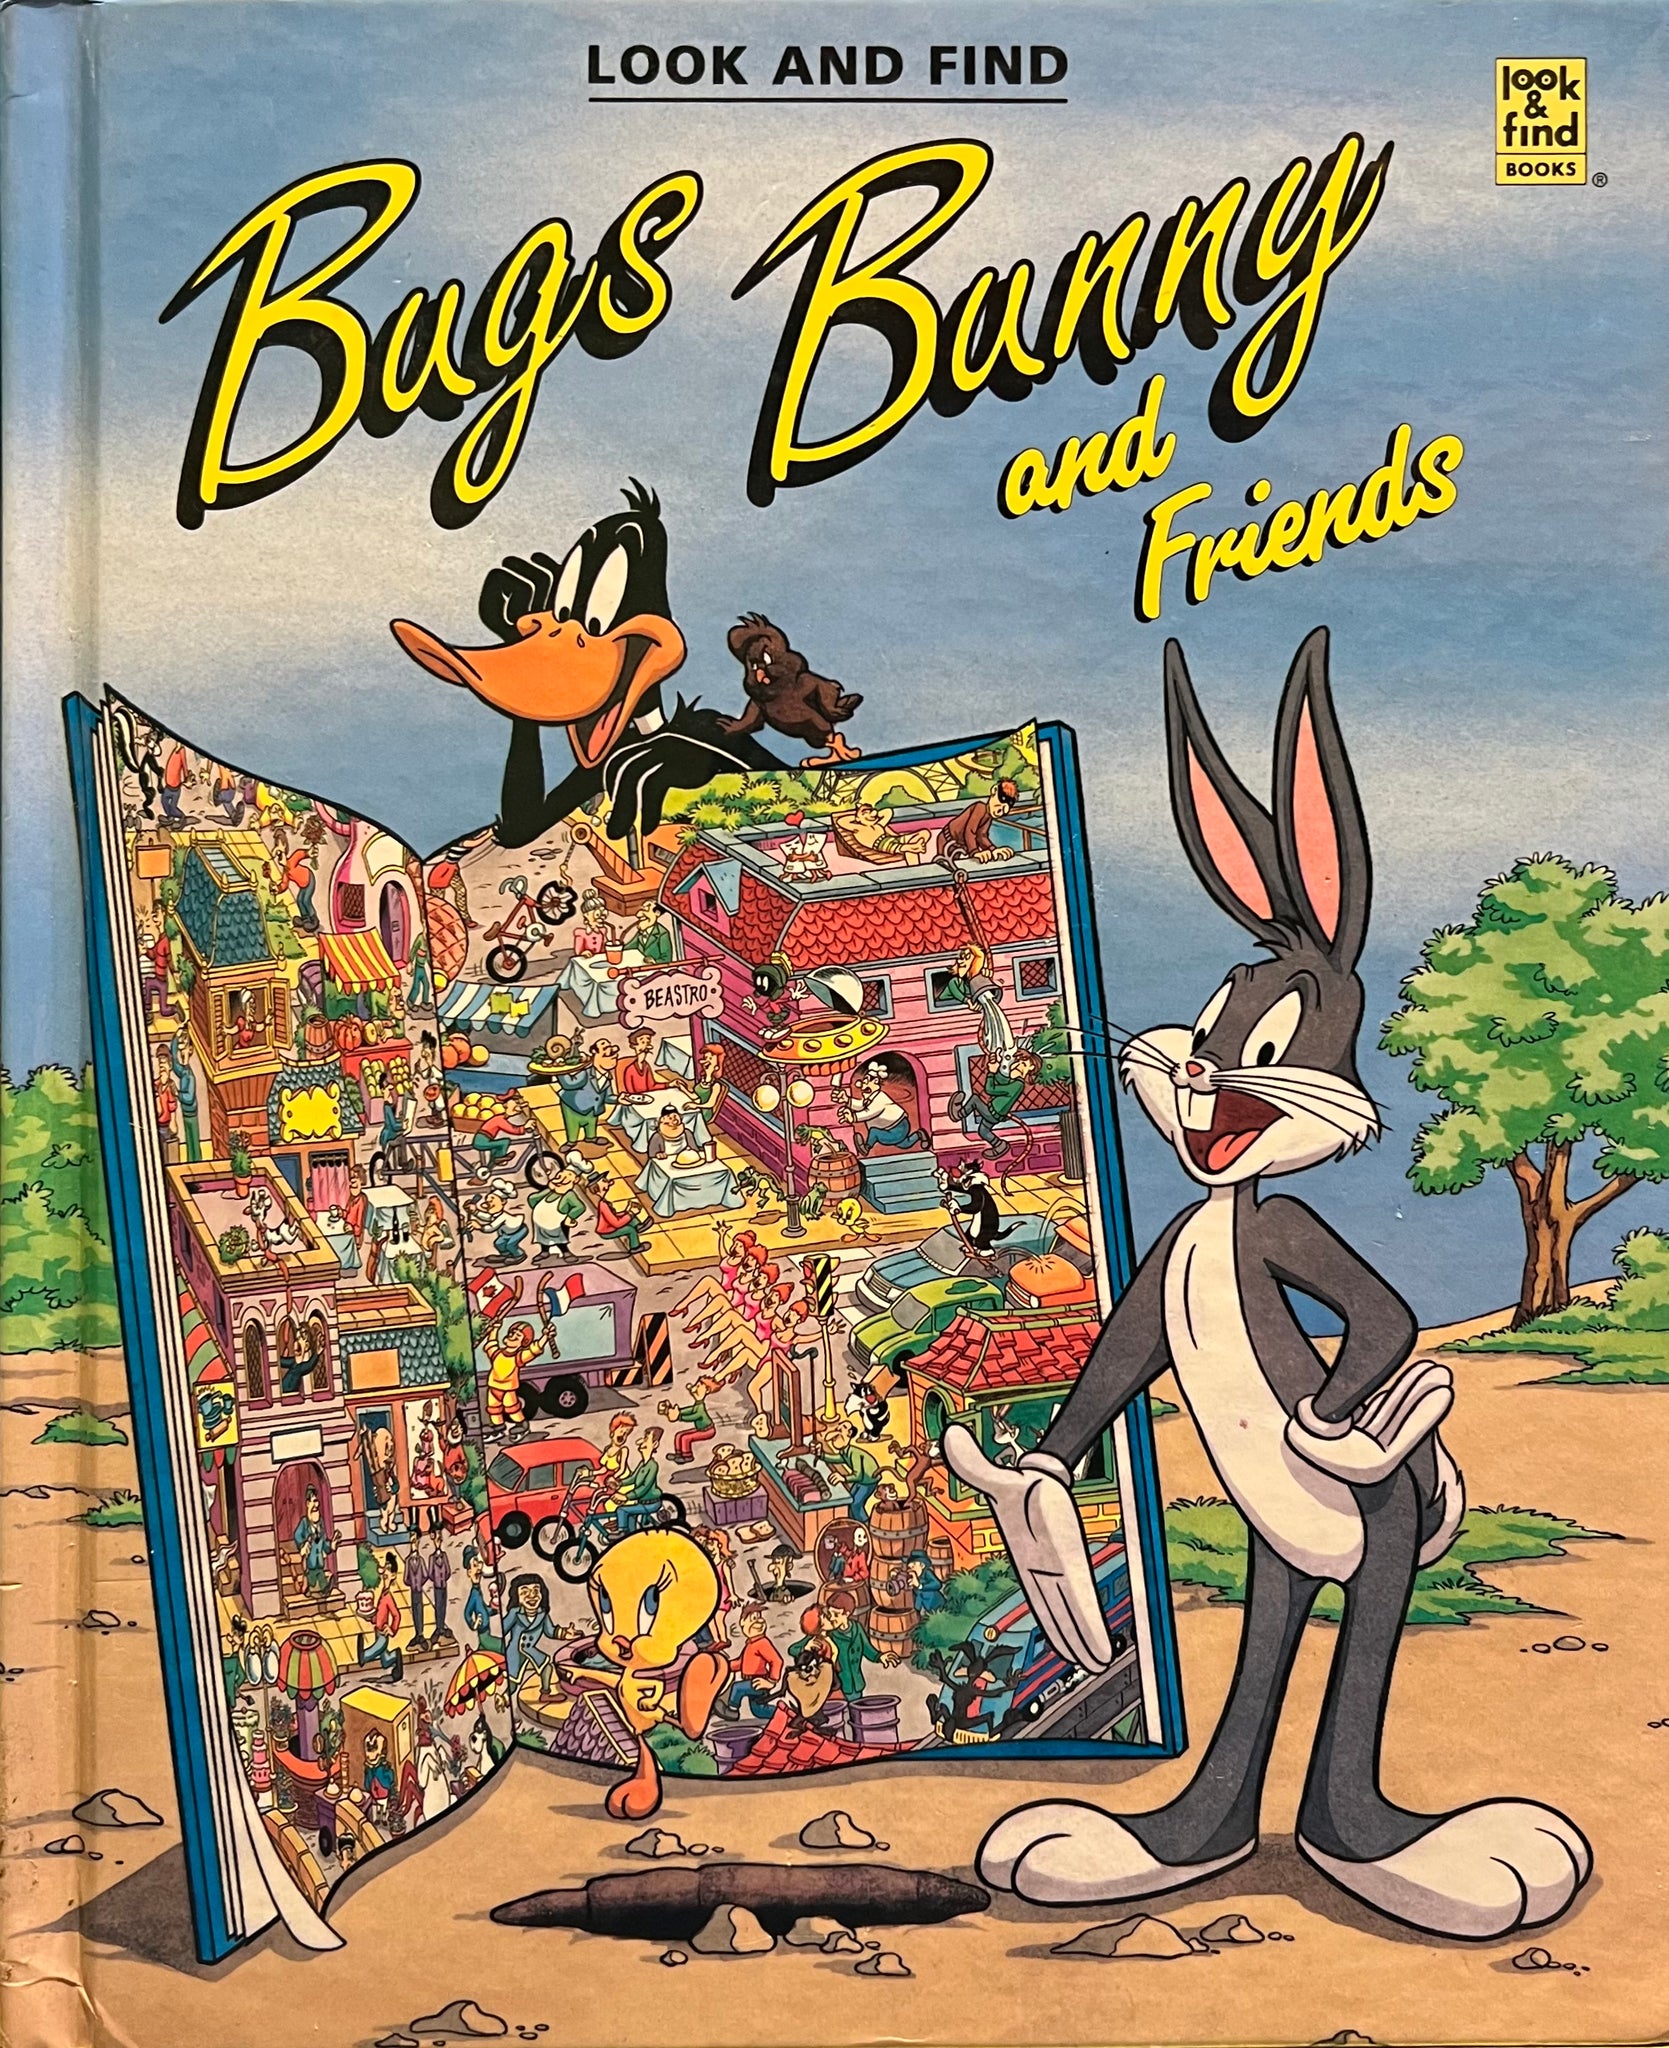 Look and Find: Bugs Bunny and Friends